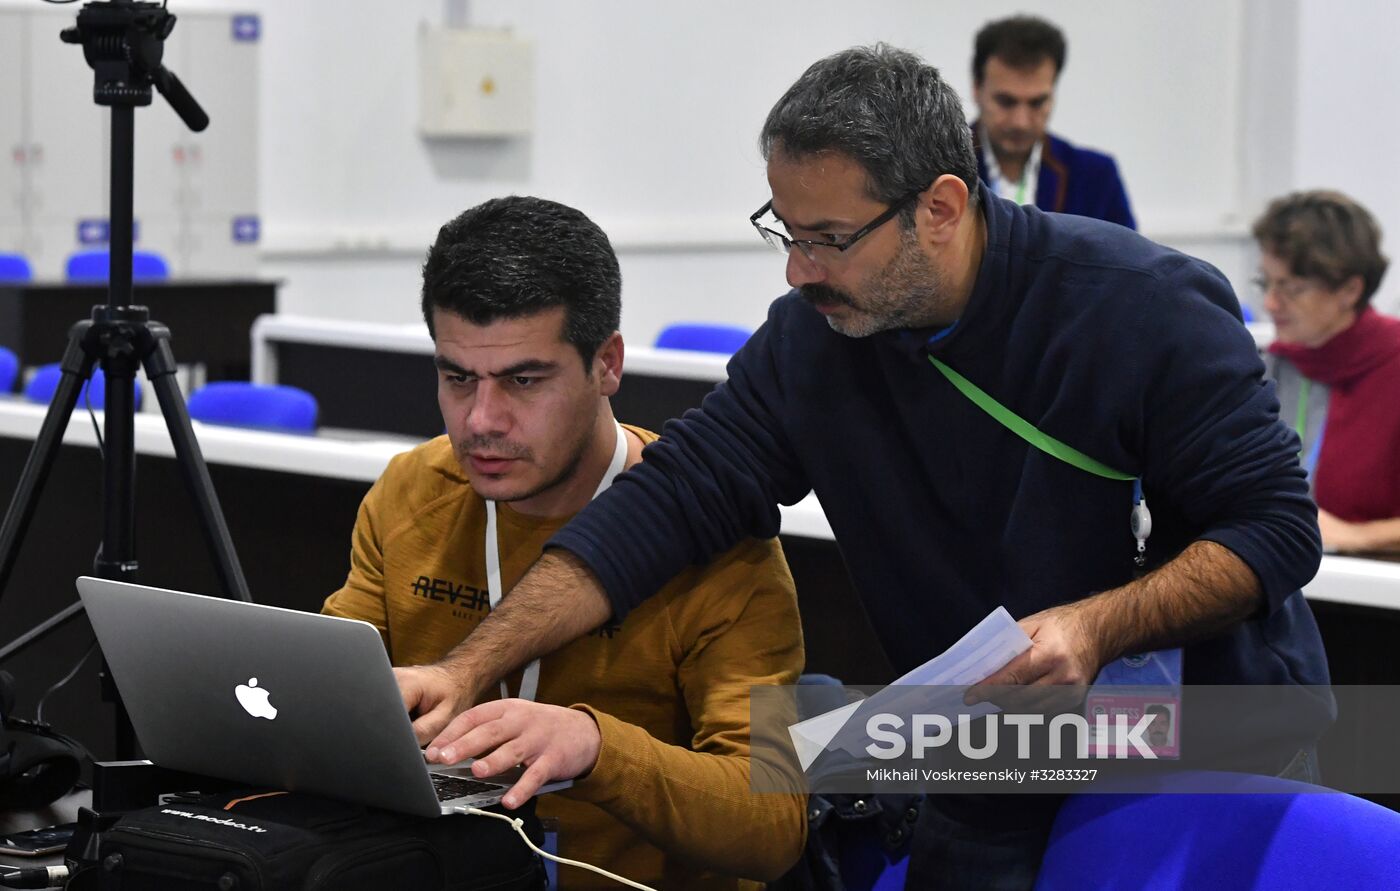 Preparations for Congress of Syrian National Dialog in Sochi